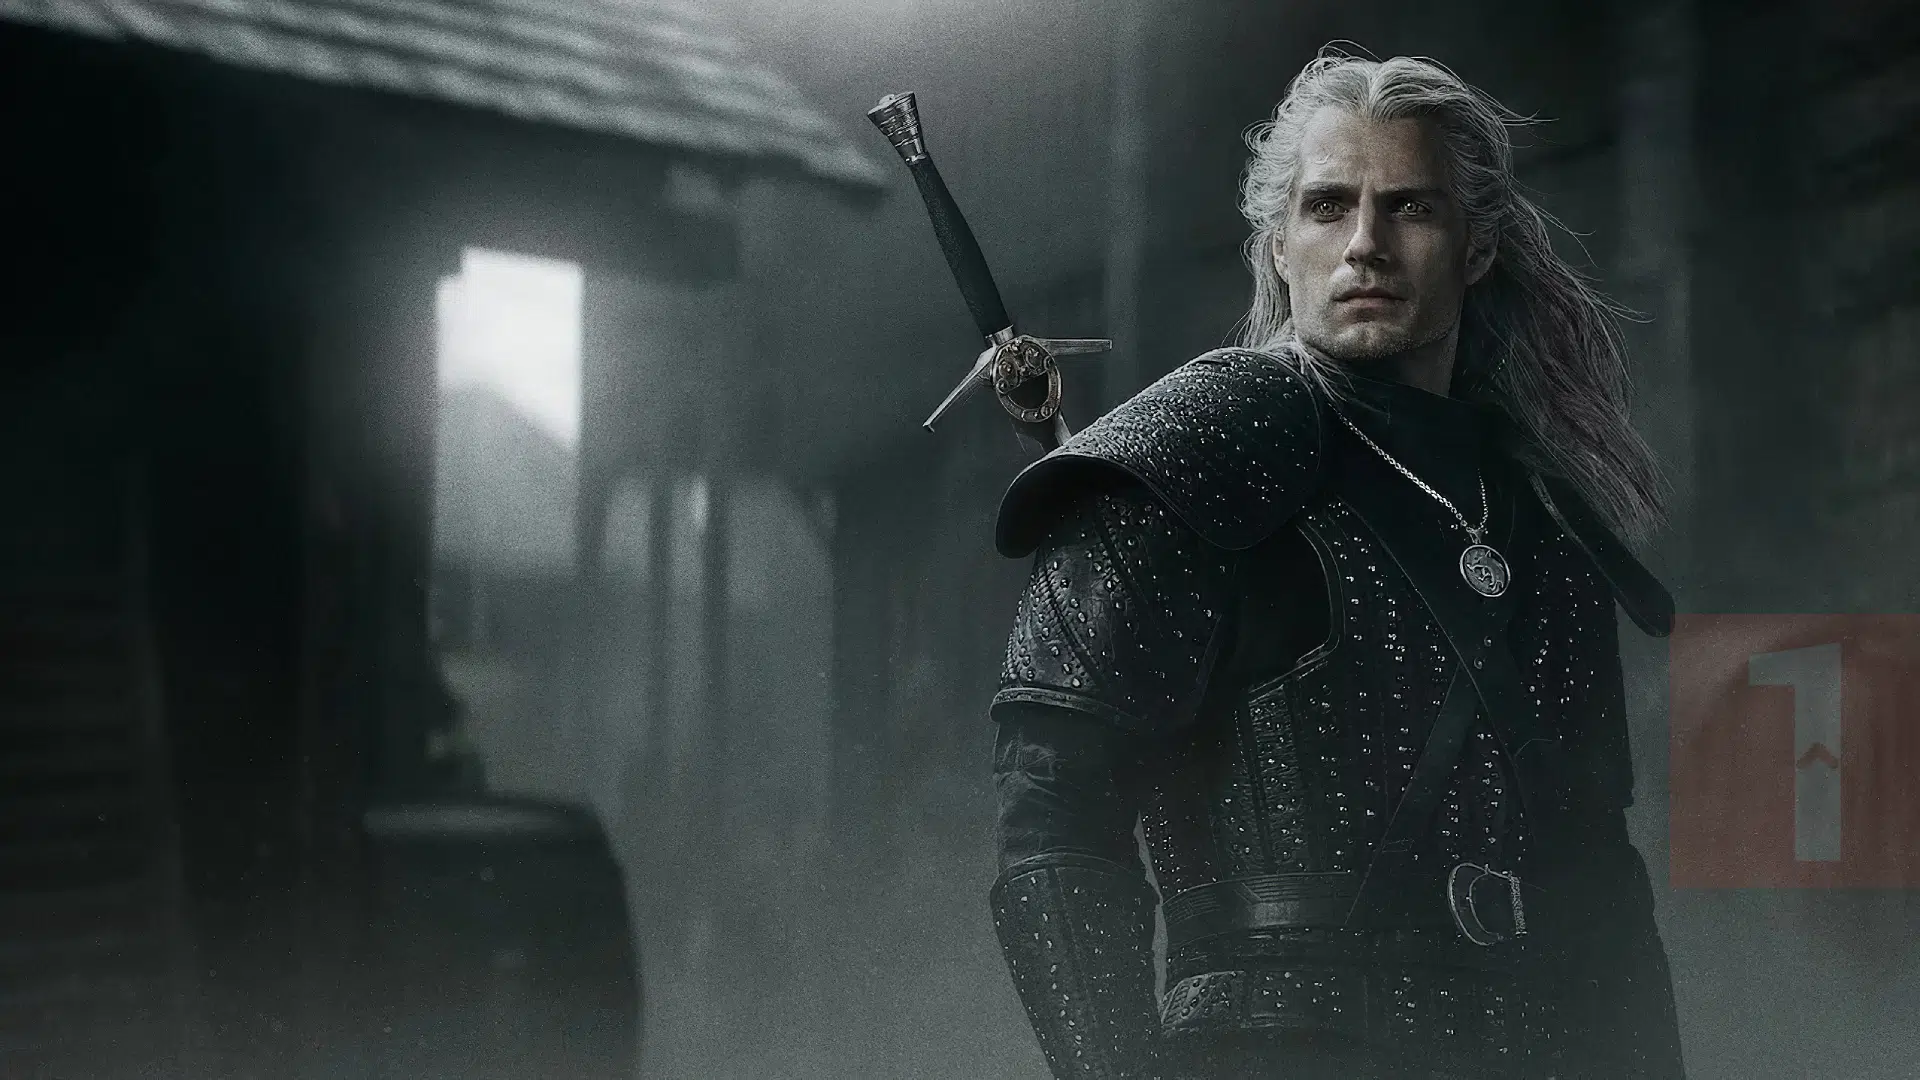 Where to Find The Witcher 3 New Quest For Netflix Armor guide